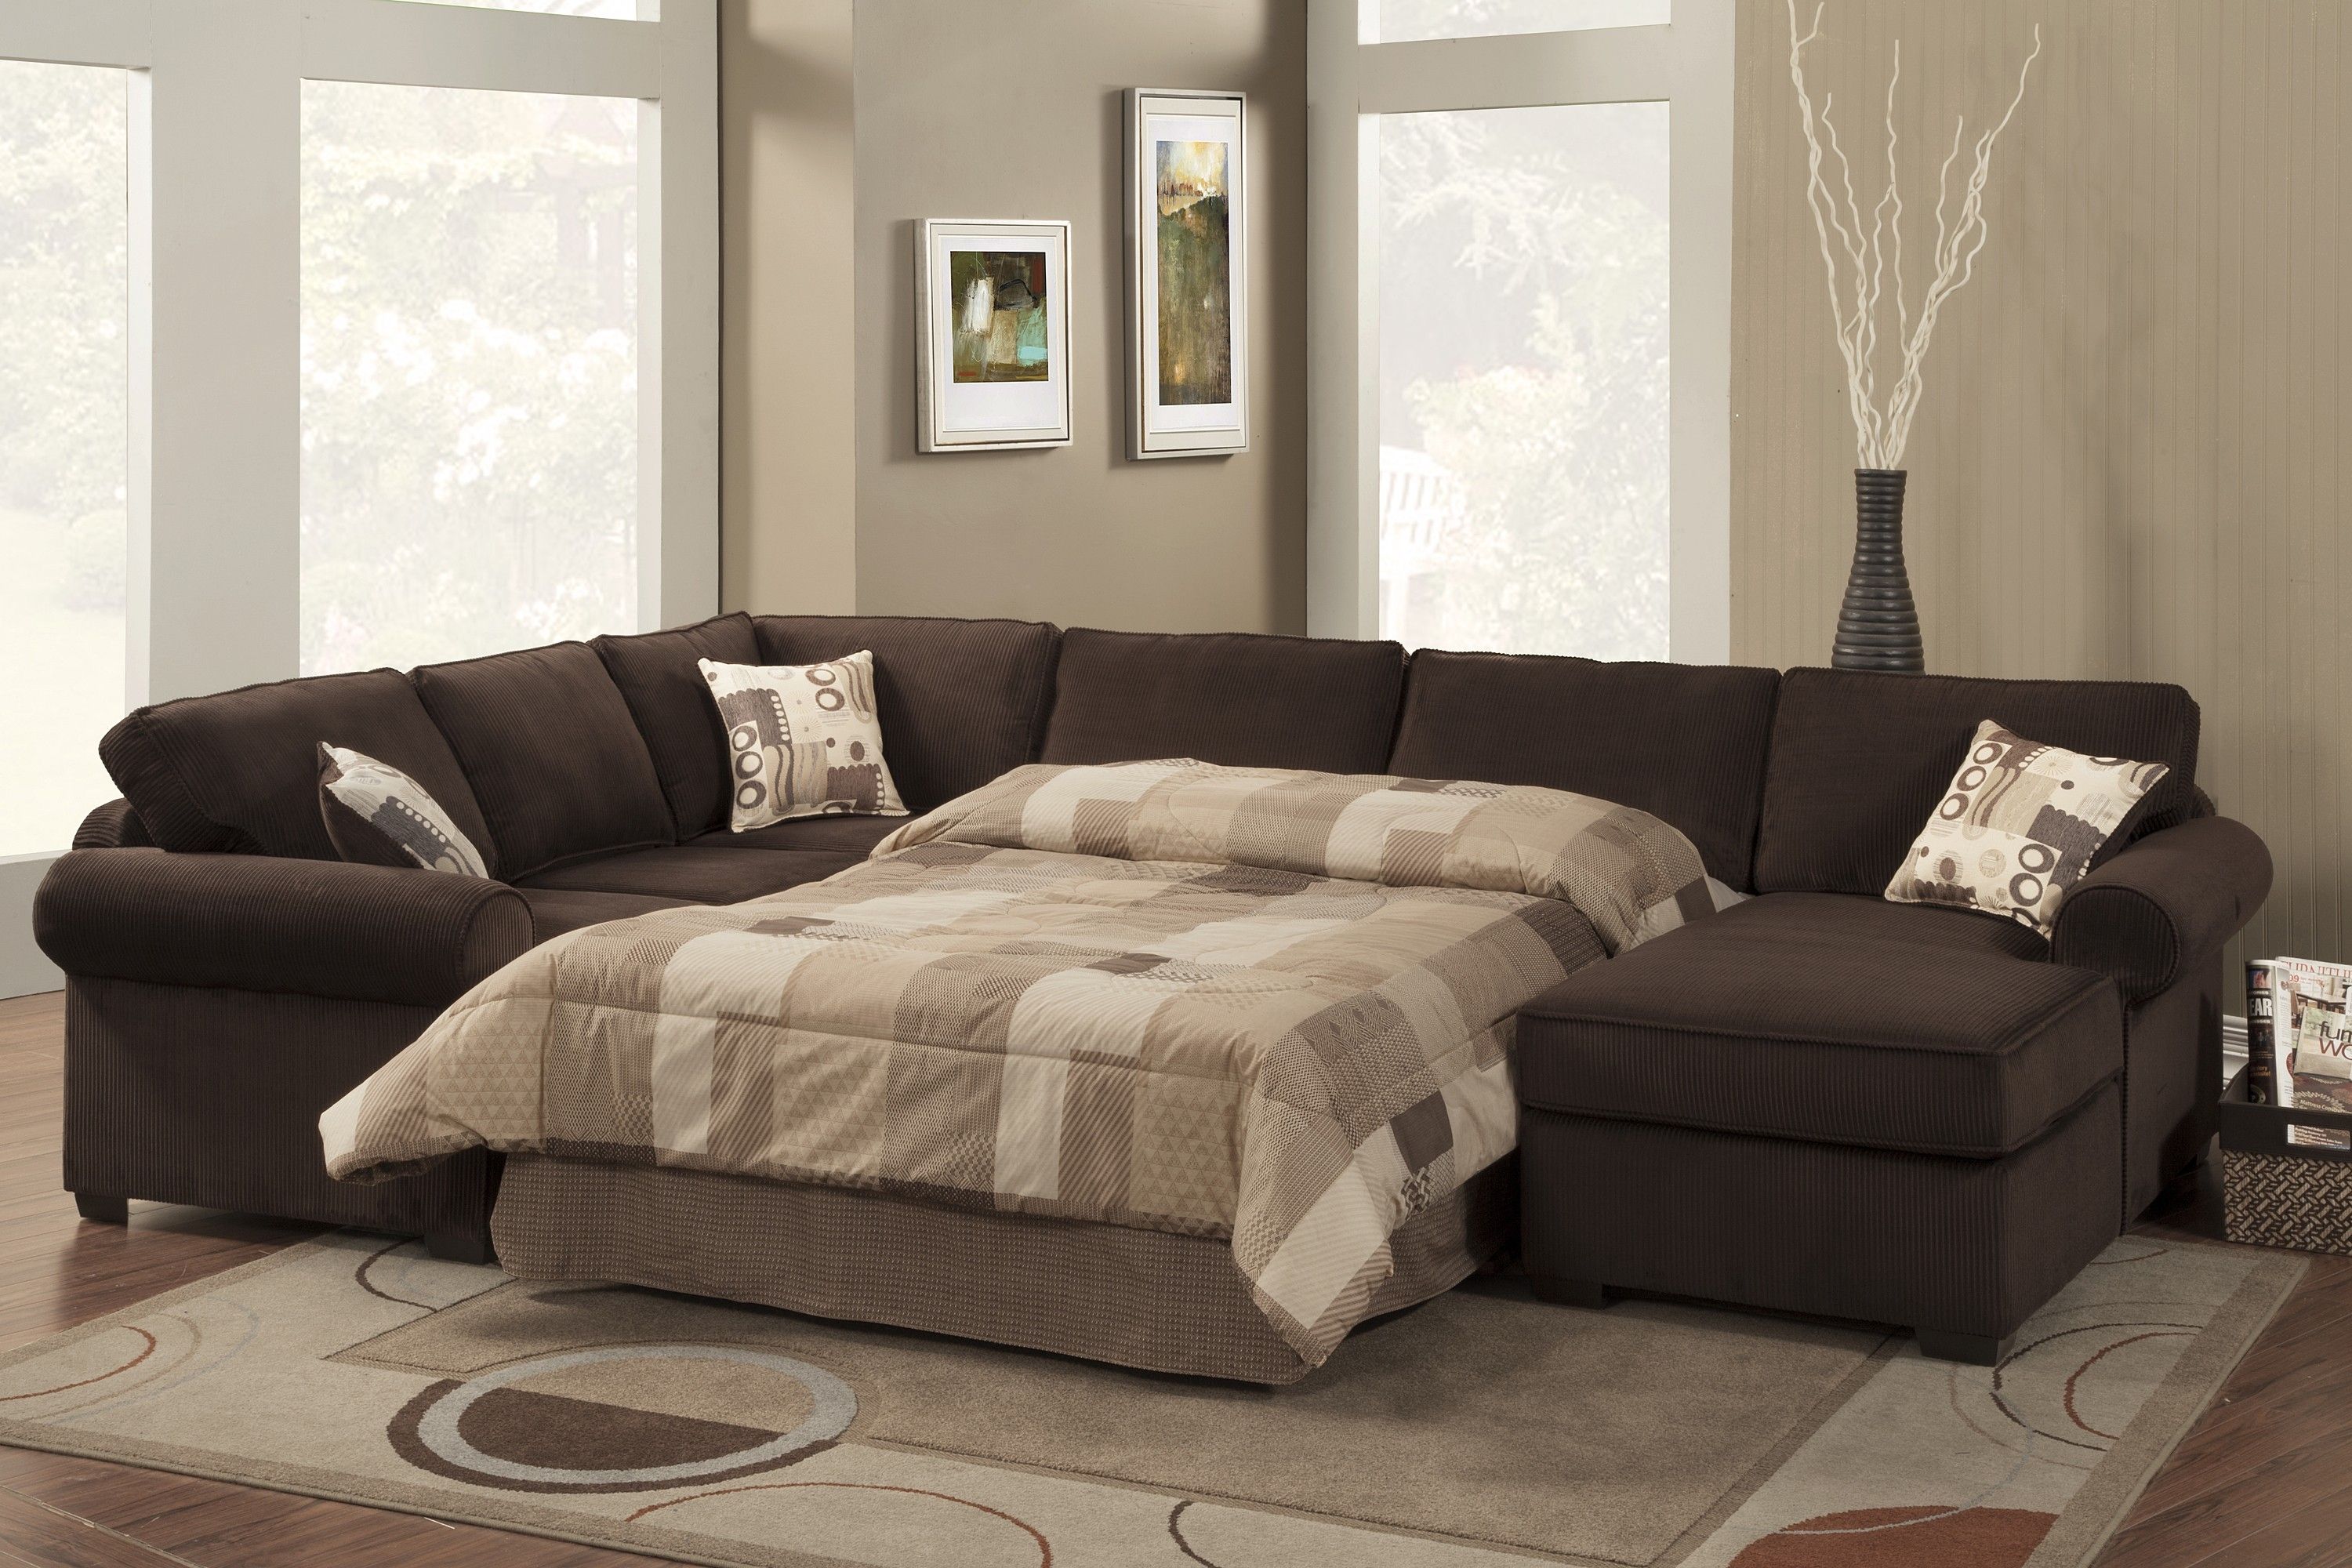 3 piece sectional sleeper pull out sofa bed